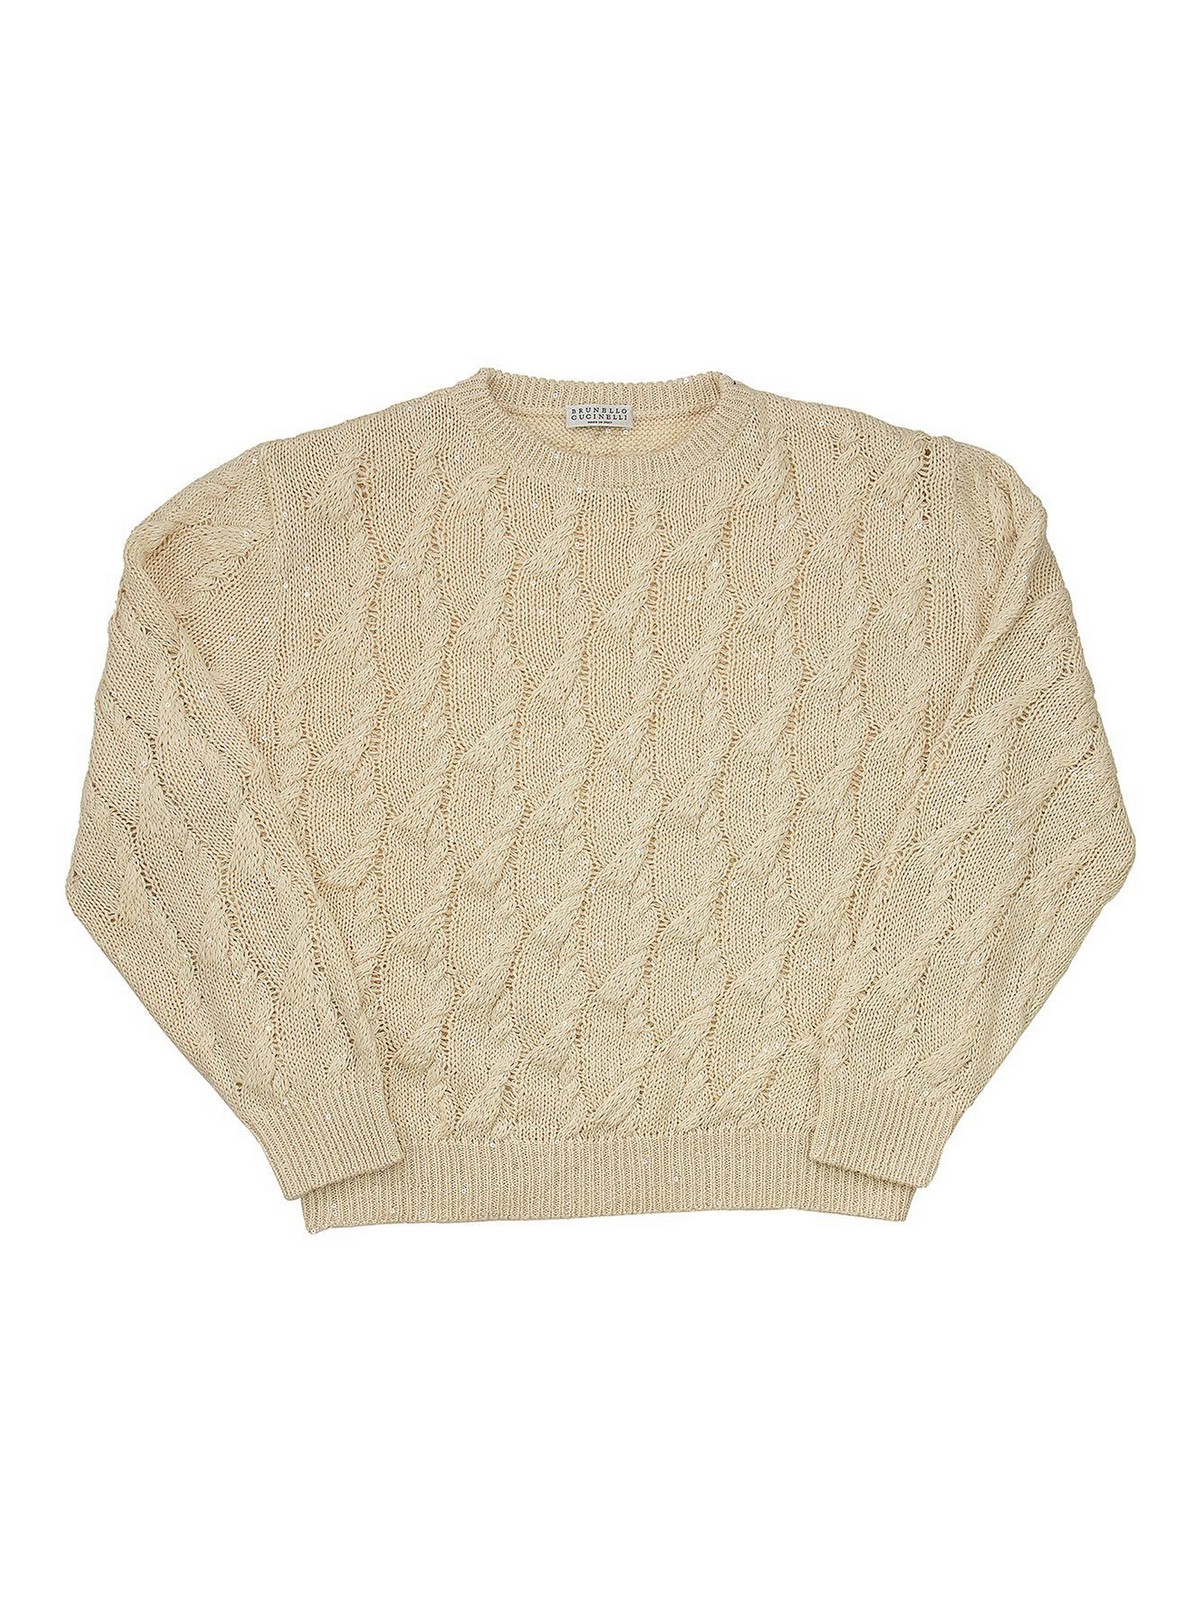 BRUNELLO CUCINELLI CABLE KNIT JUMPER WITH SEQUINS